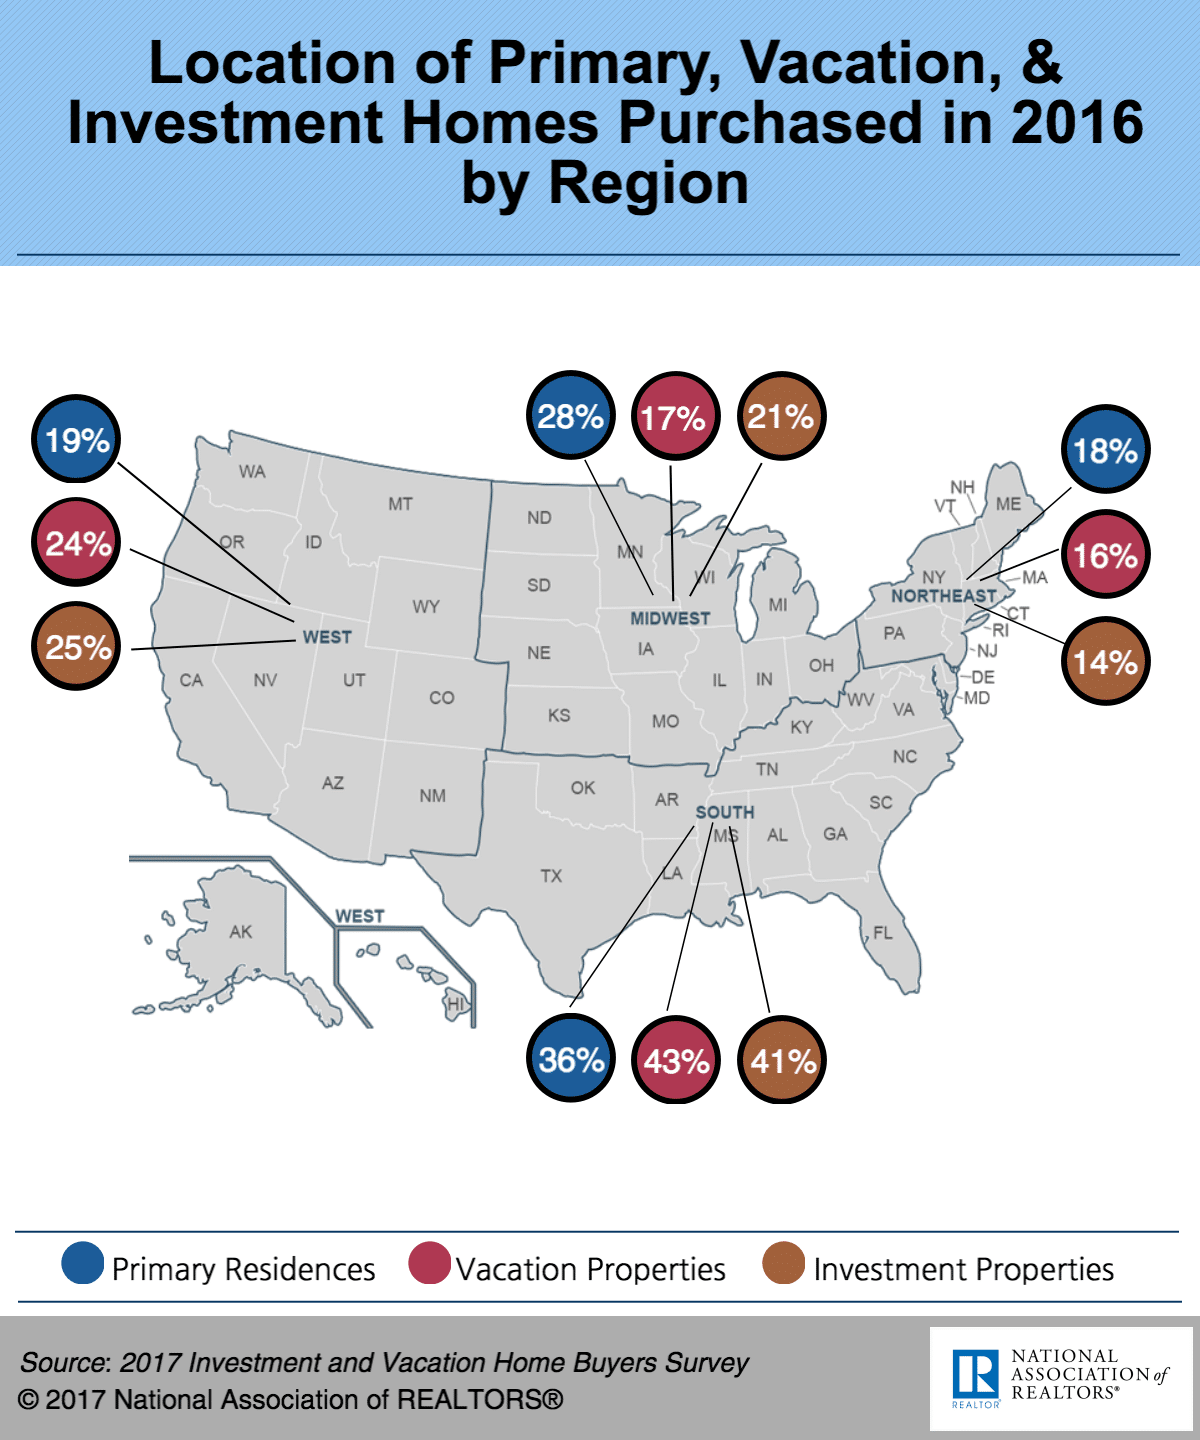 2016 primary vacation investment homes by region infographic 04 17 2017 1200w 1440h